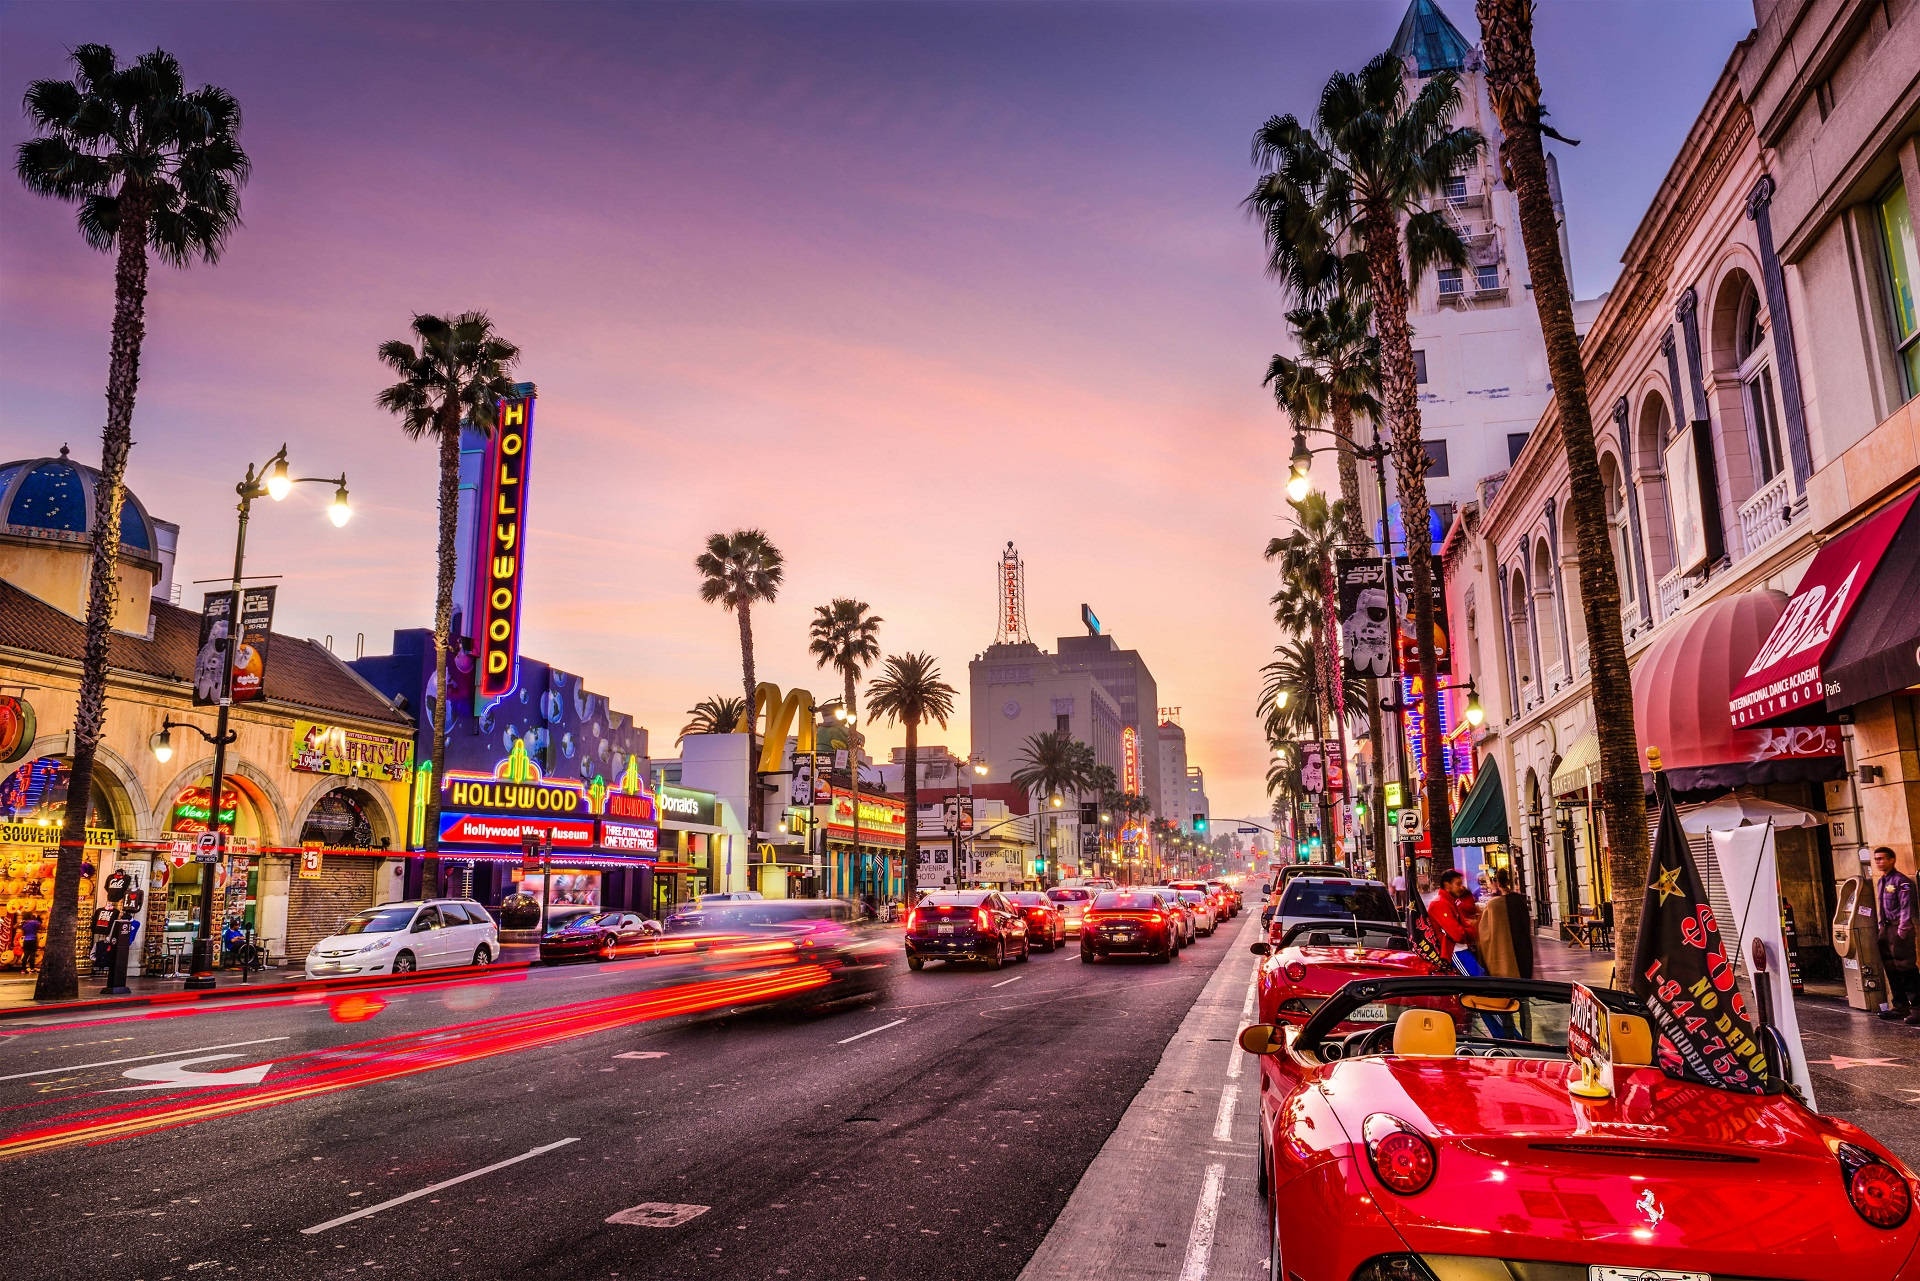 Free Hollywood Wallpaper Downloads, [5300+] Hollywood Wallpapers for FREE |  